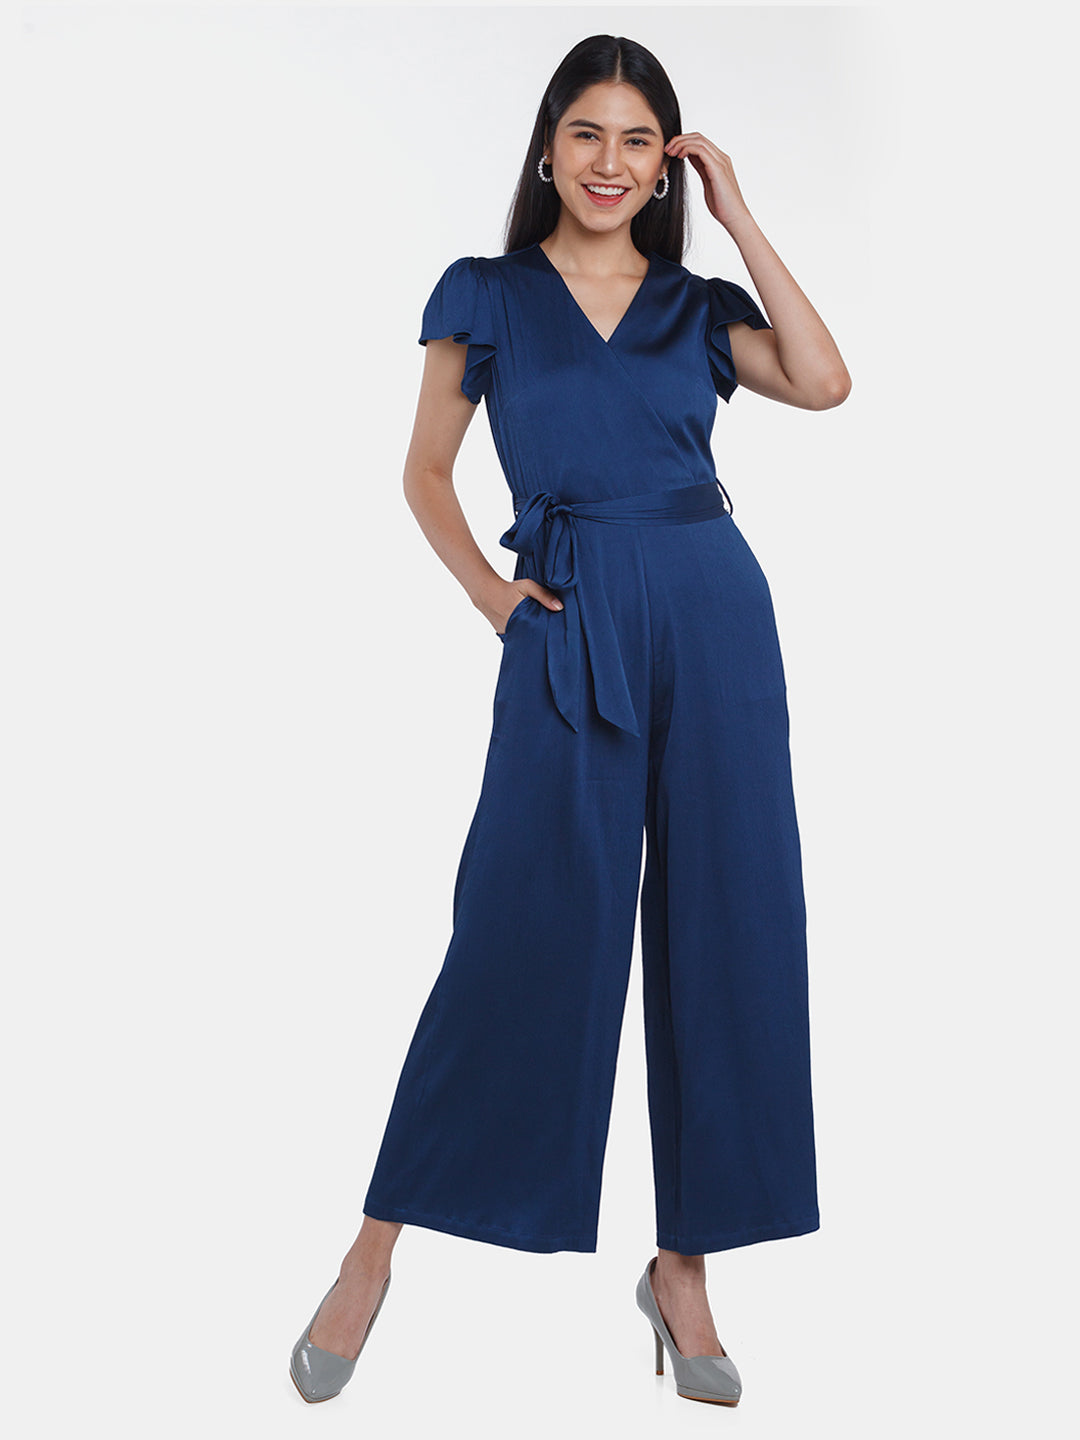 Navy Blue Solid Flared Sleeve Jumpsuit For Women